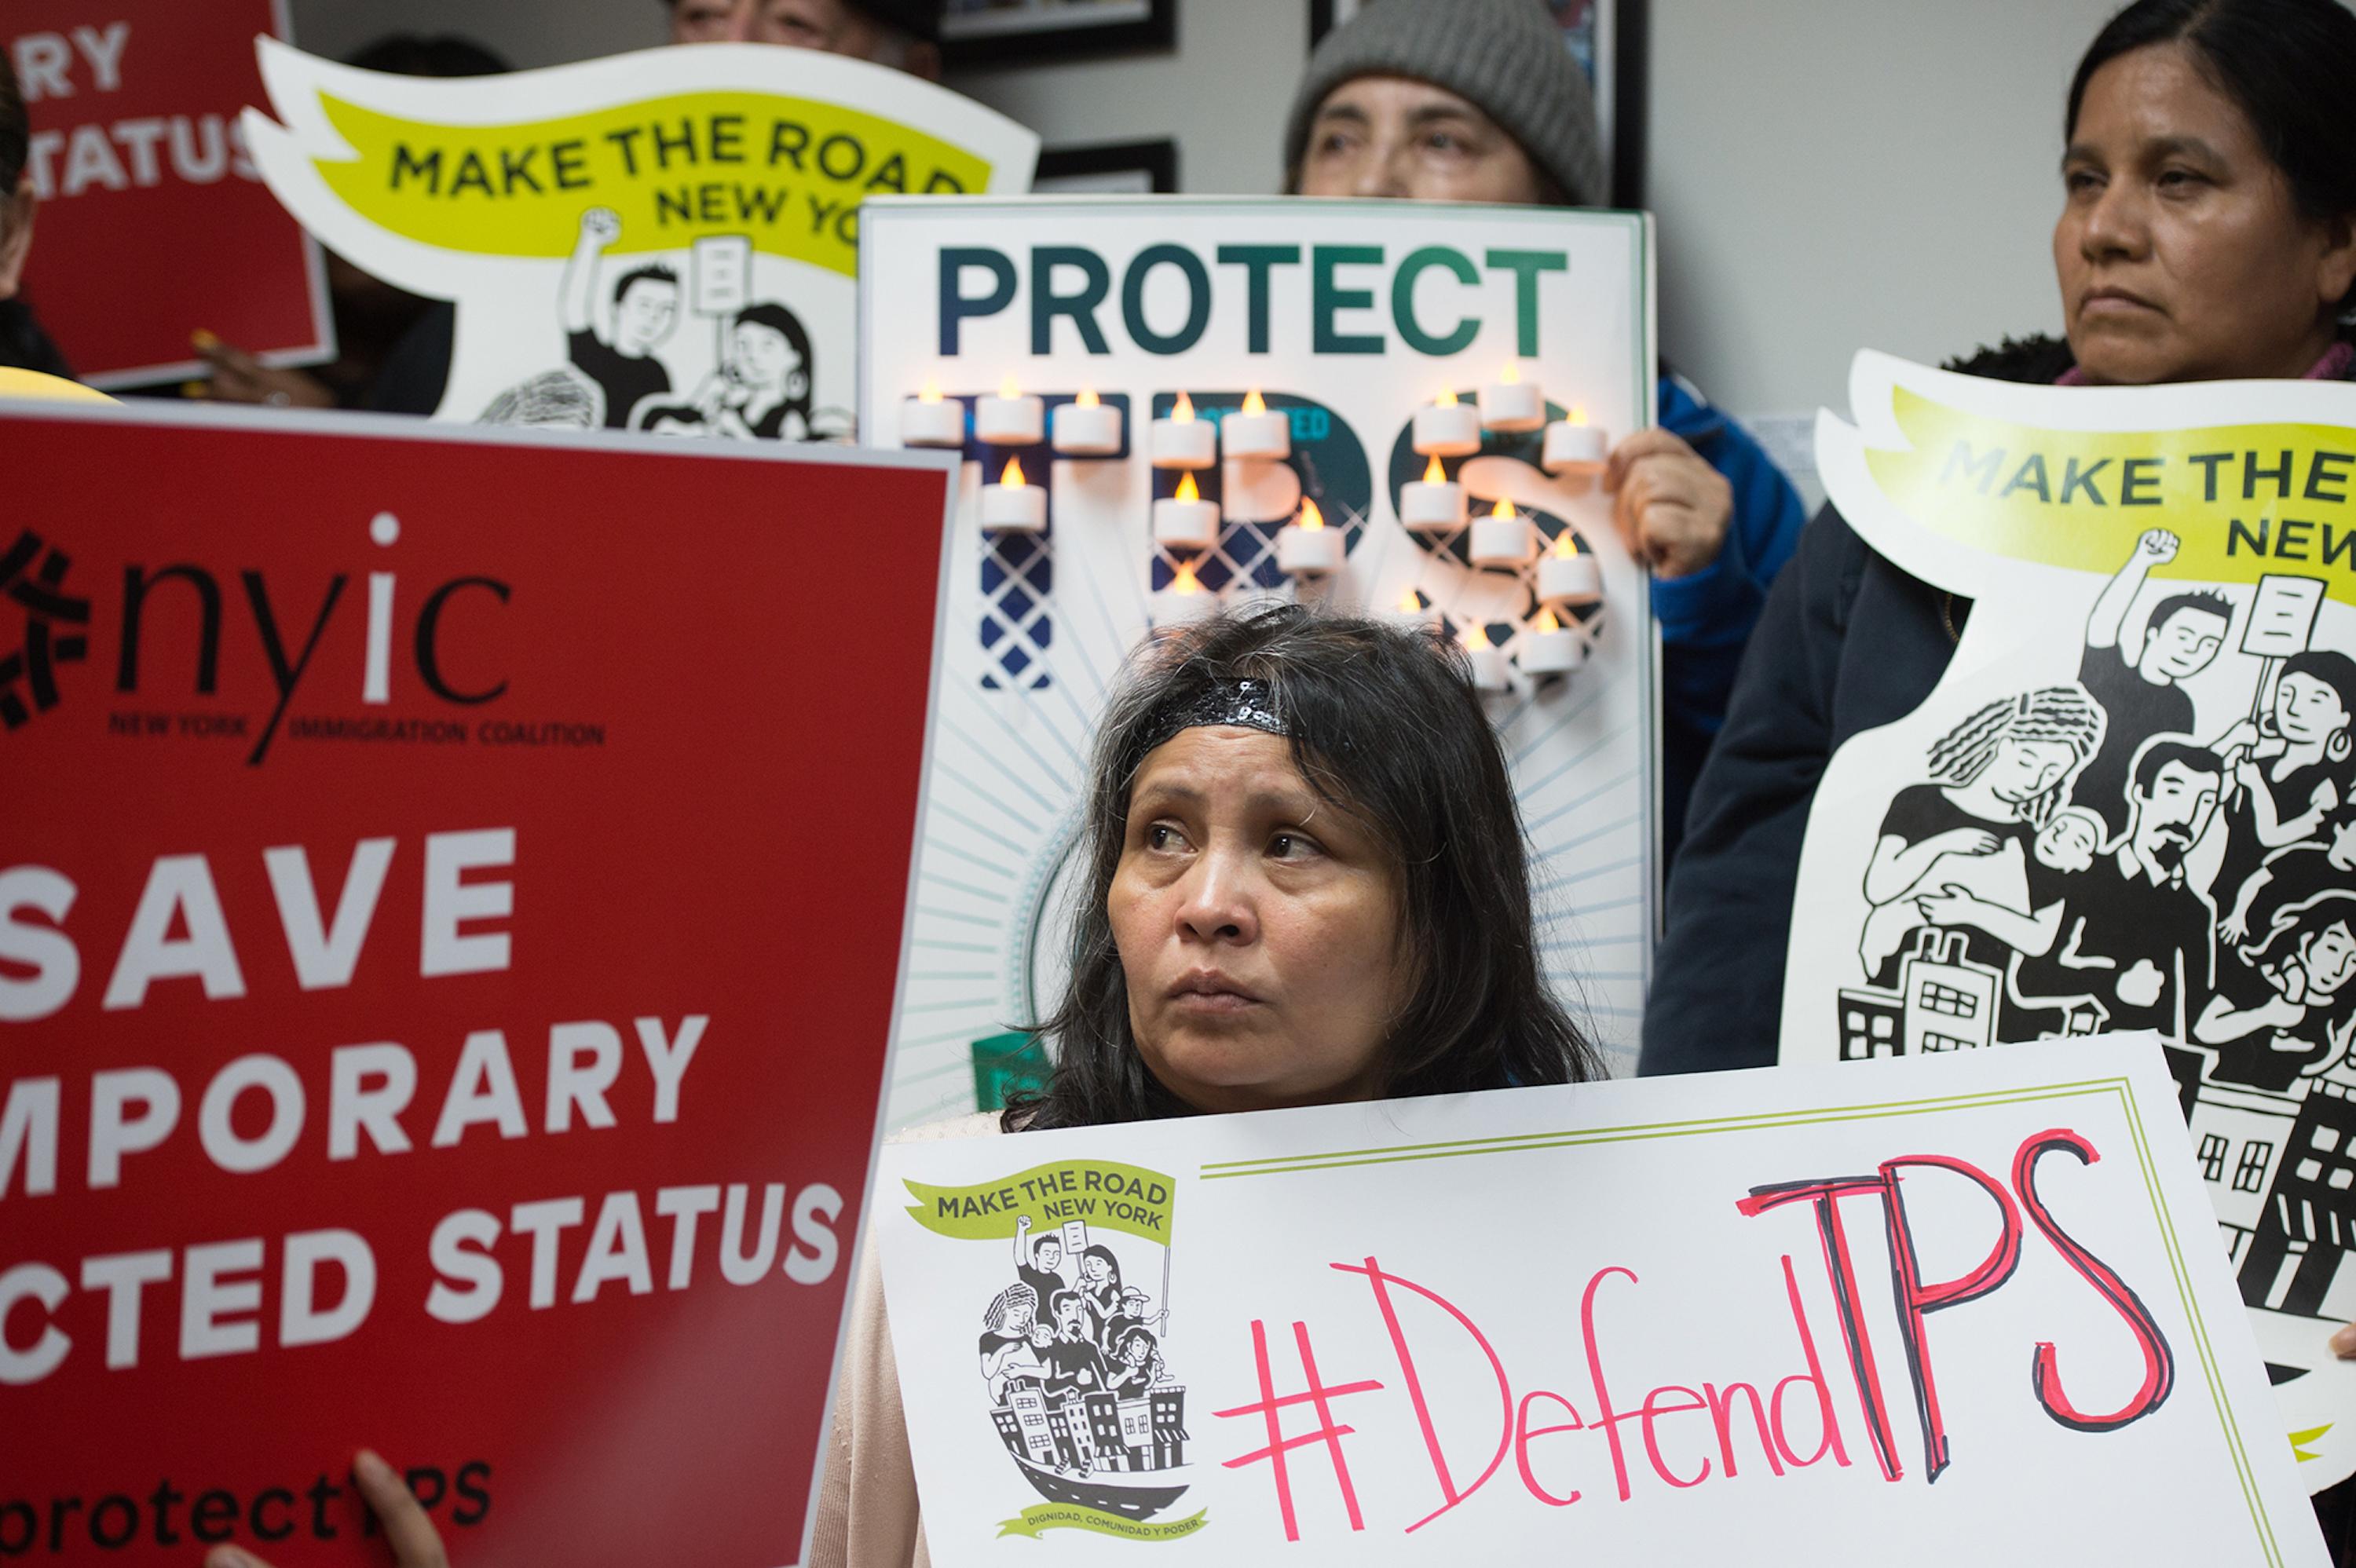 Immigrants, activists and elected officials hold a press conference on January 8, 2018, in New York to demand that the Department of Homeland Security extend Temporary Protected Status (TPS) for more than 195,000 Salvadorans. The US government had just announced the end of TPS for about 200,000 Salvadoran immigrants, threatening with deportation tens of thousands of well-established families with children born in the United States. Photo: Brian Smith/AFP